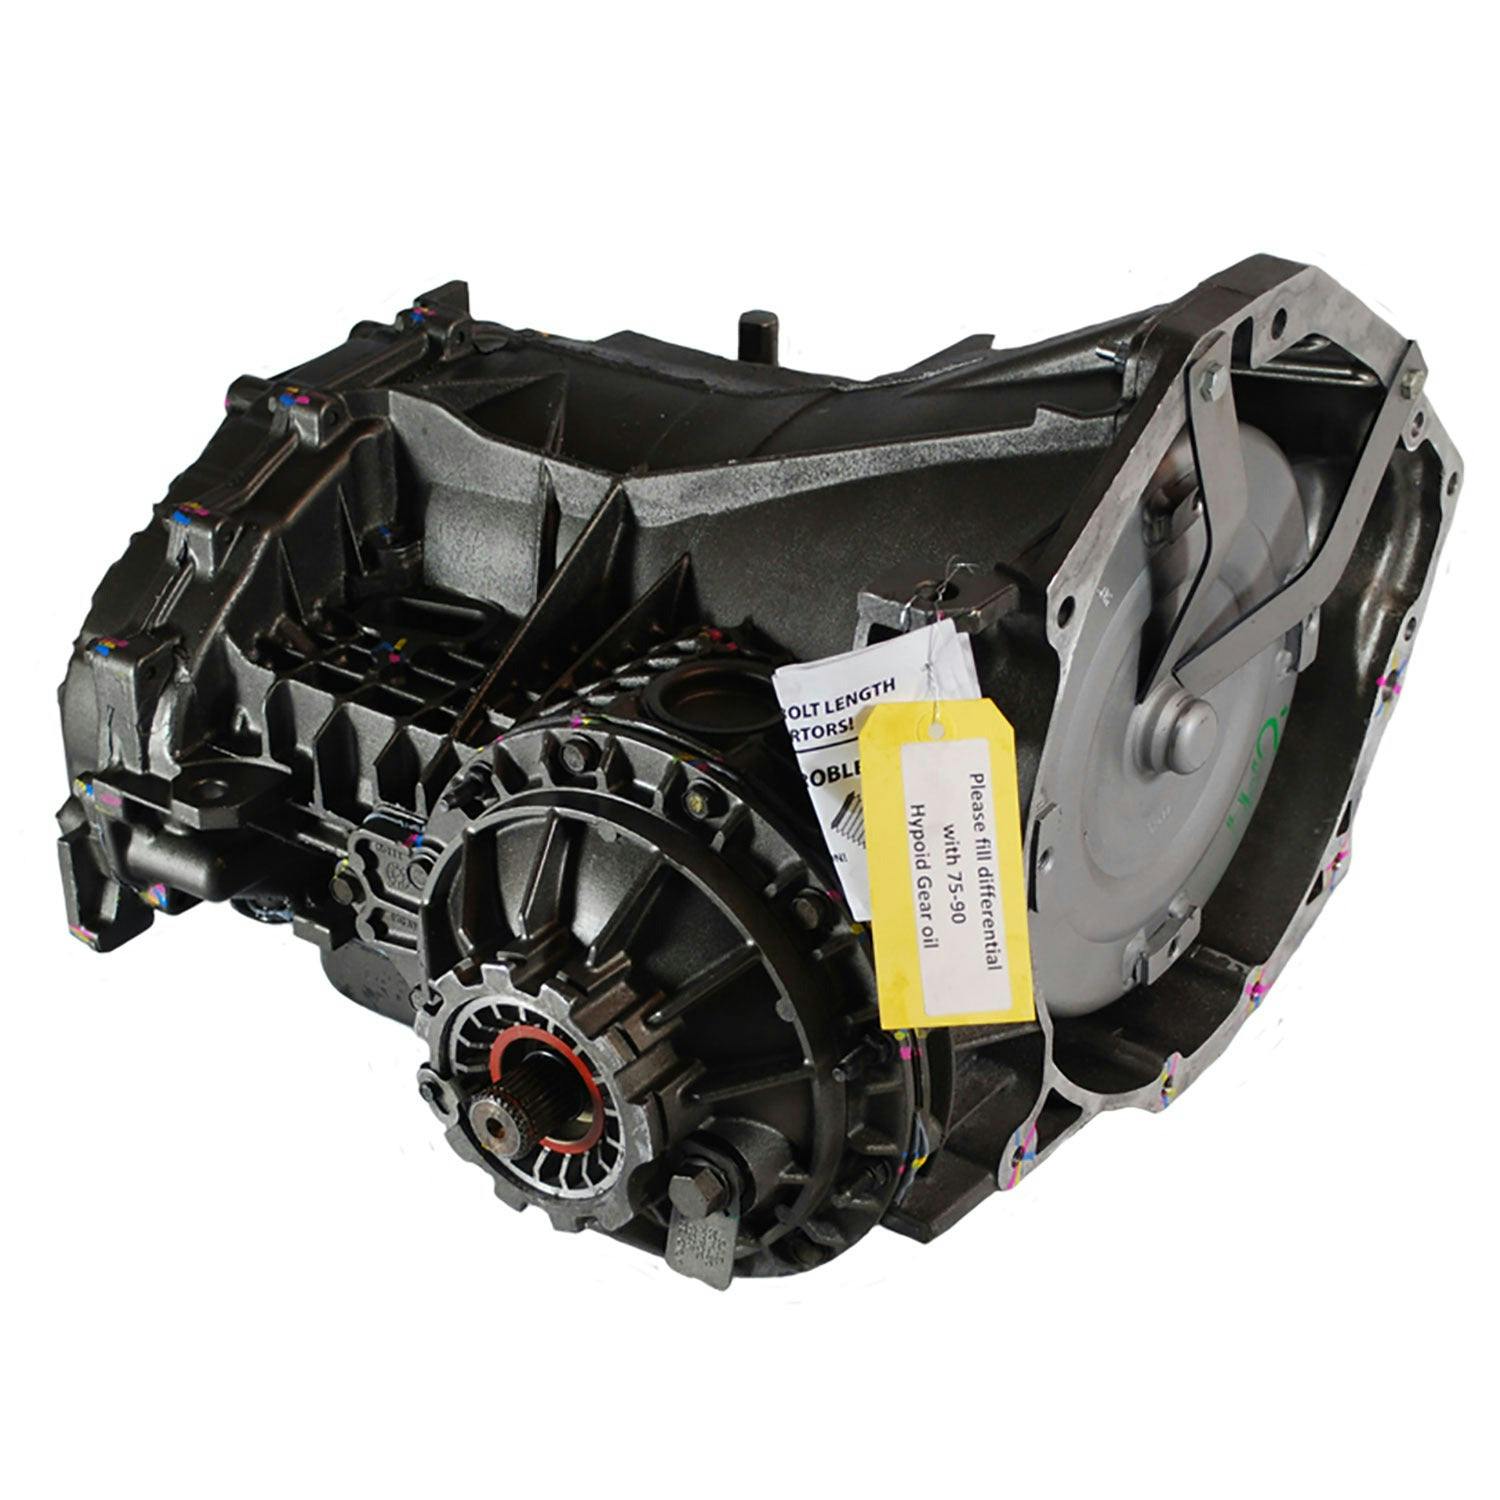 Automatic Transmission for 1999-2004 Chrysler 300M/Concorde/Intrepid/LHS 3.2L and Dodge Intrepid FWD with 3.2/3.5L V6 Engine